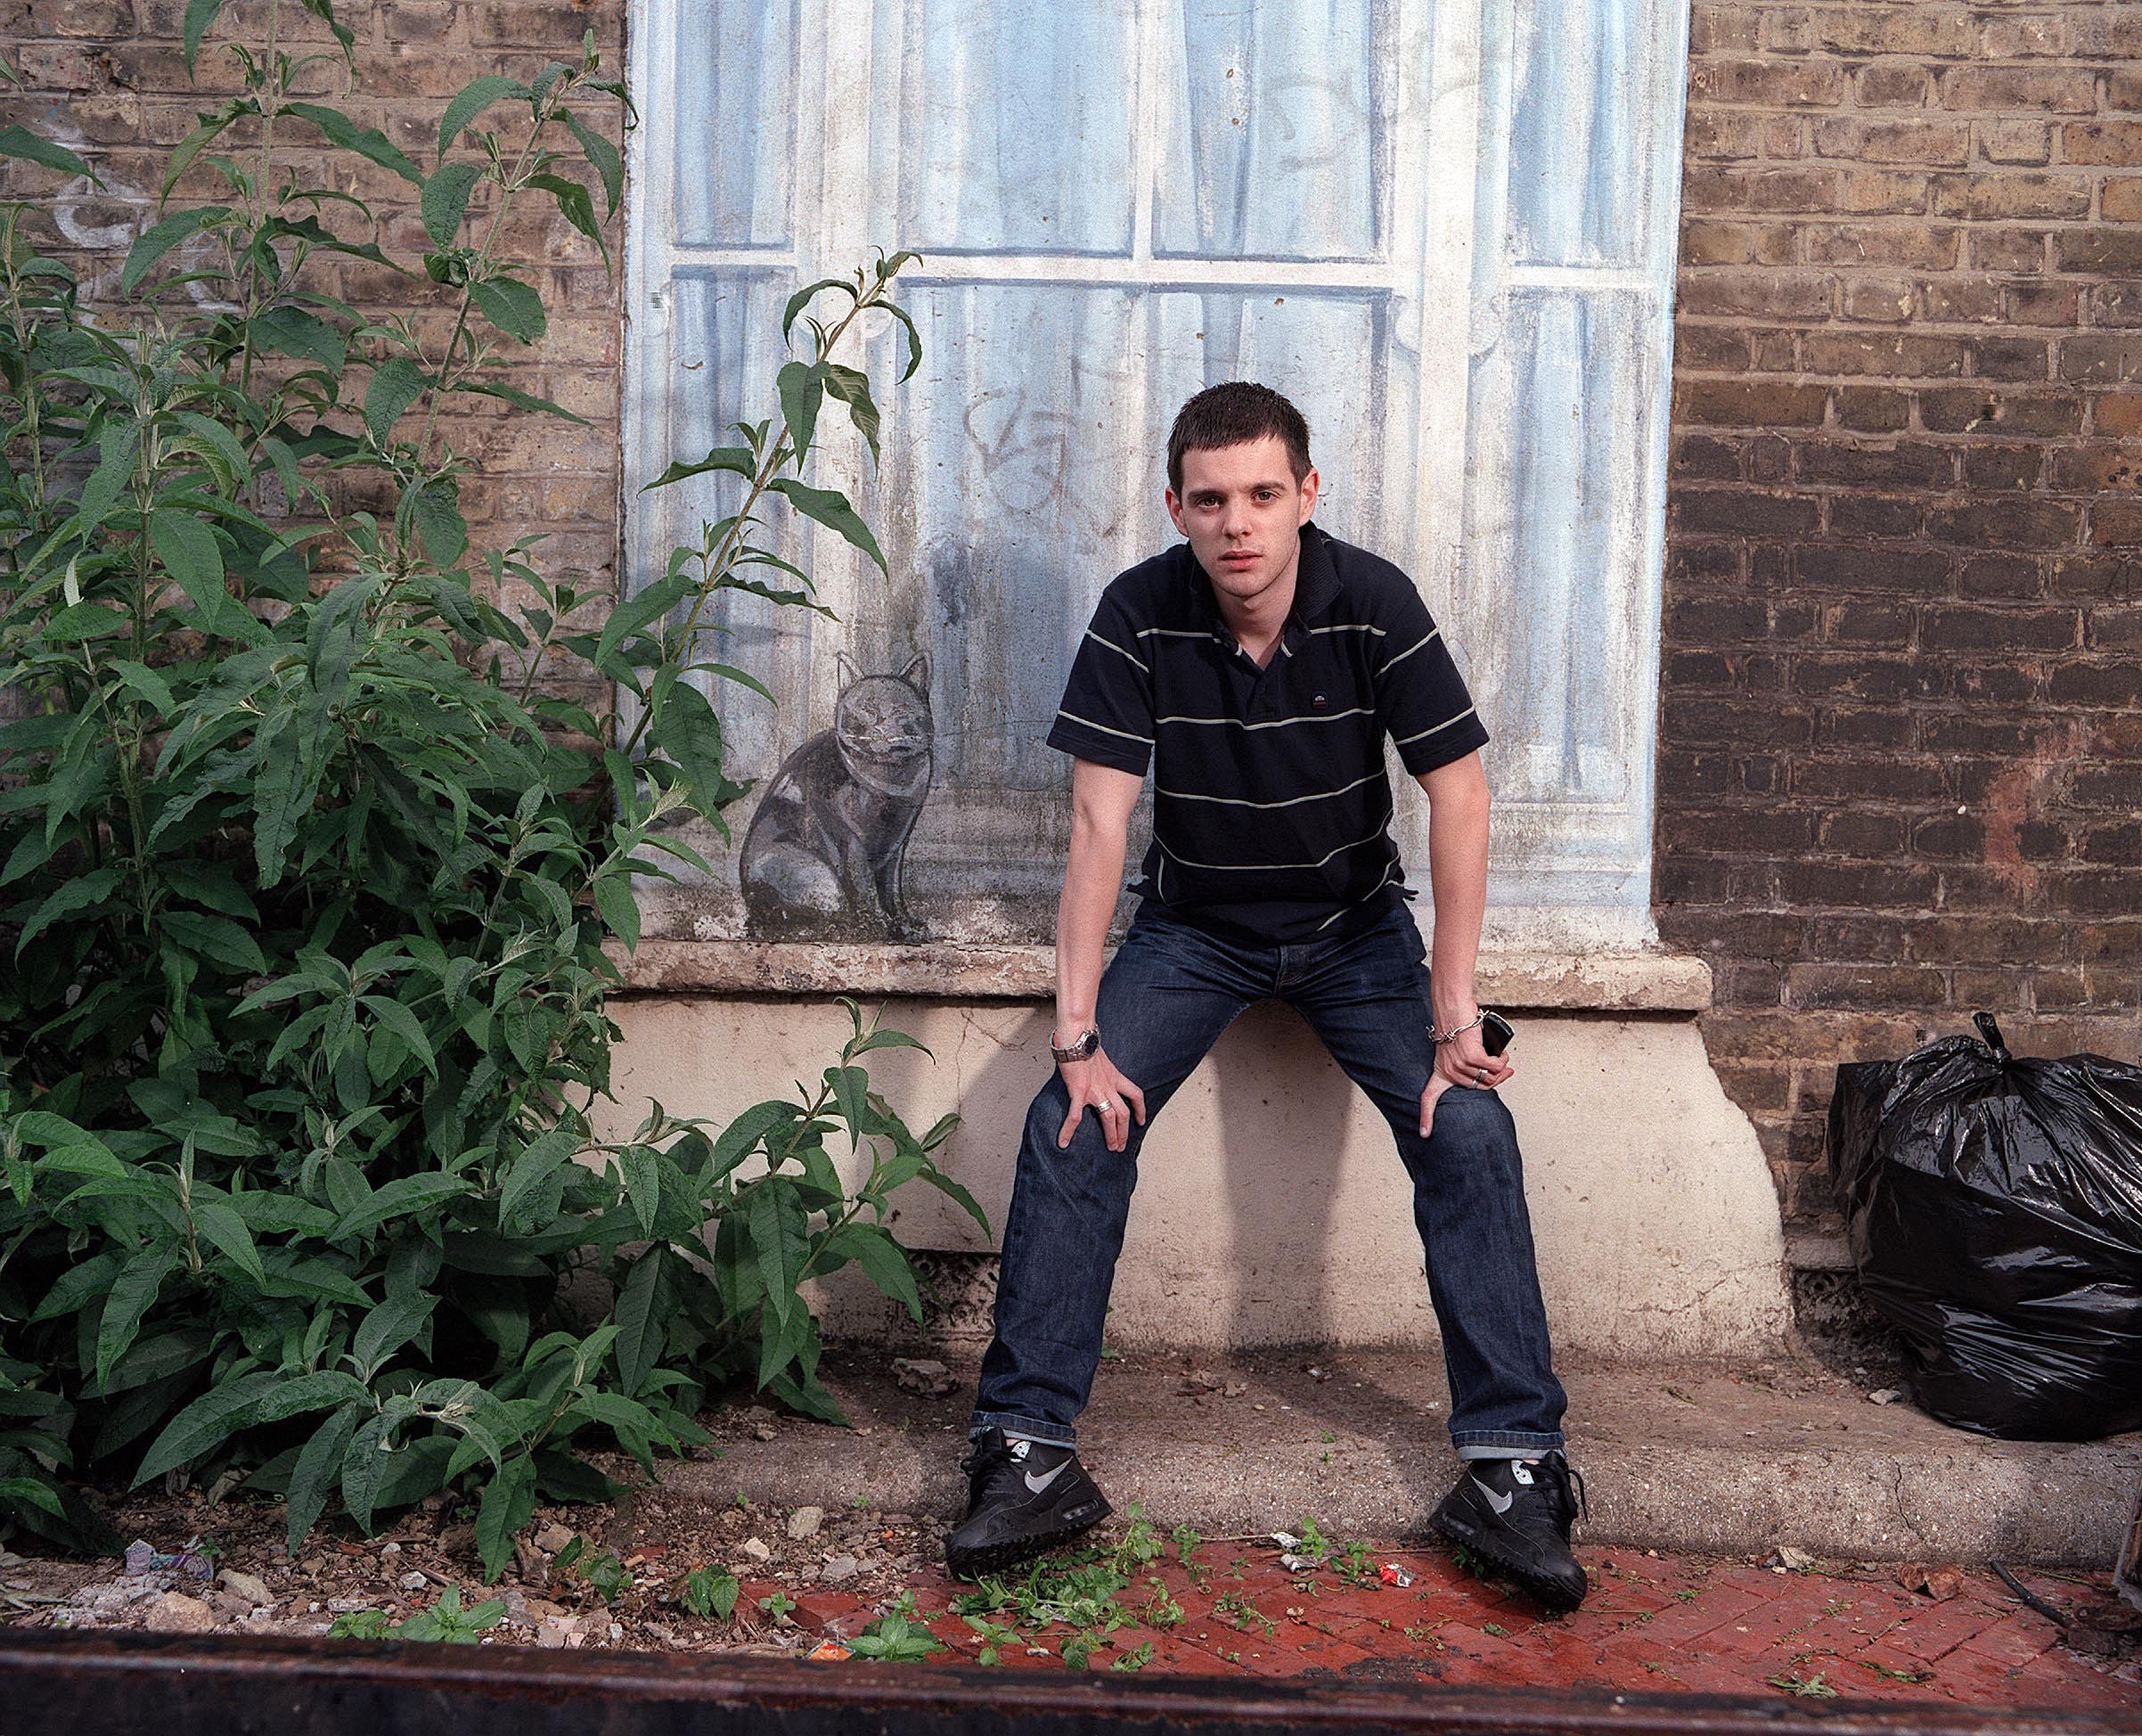 <p>‘No disenchanted deadbeat, however addled or angry or brutalised, was beyond redemption’: Mike Skinner in 2002</p>